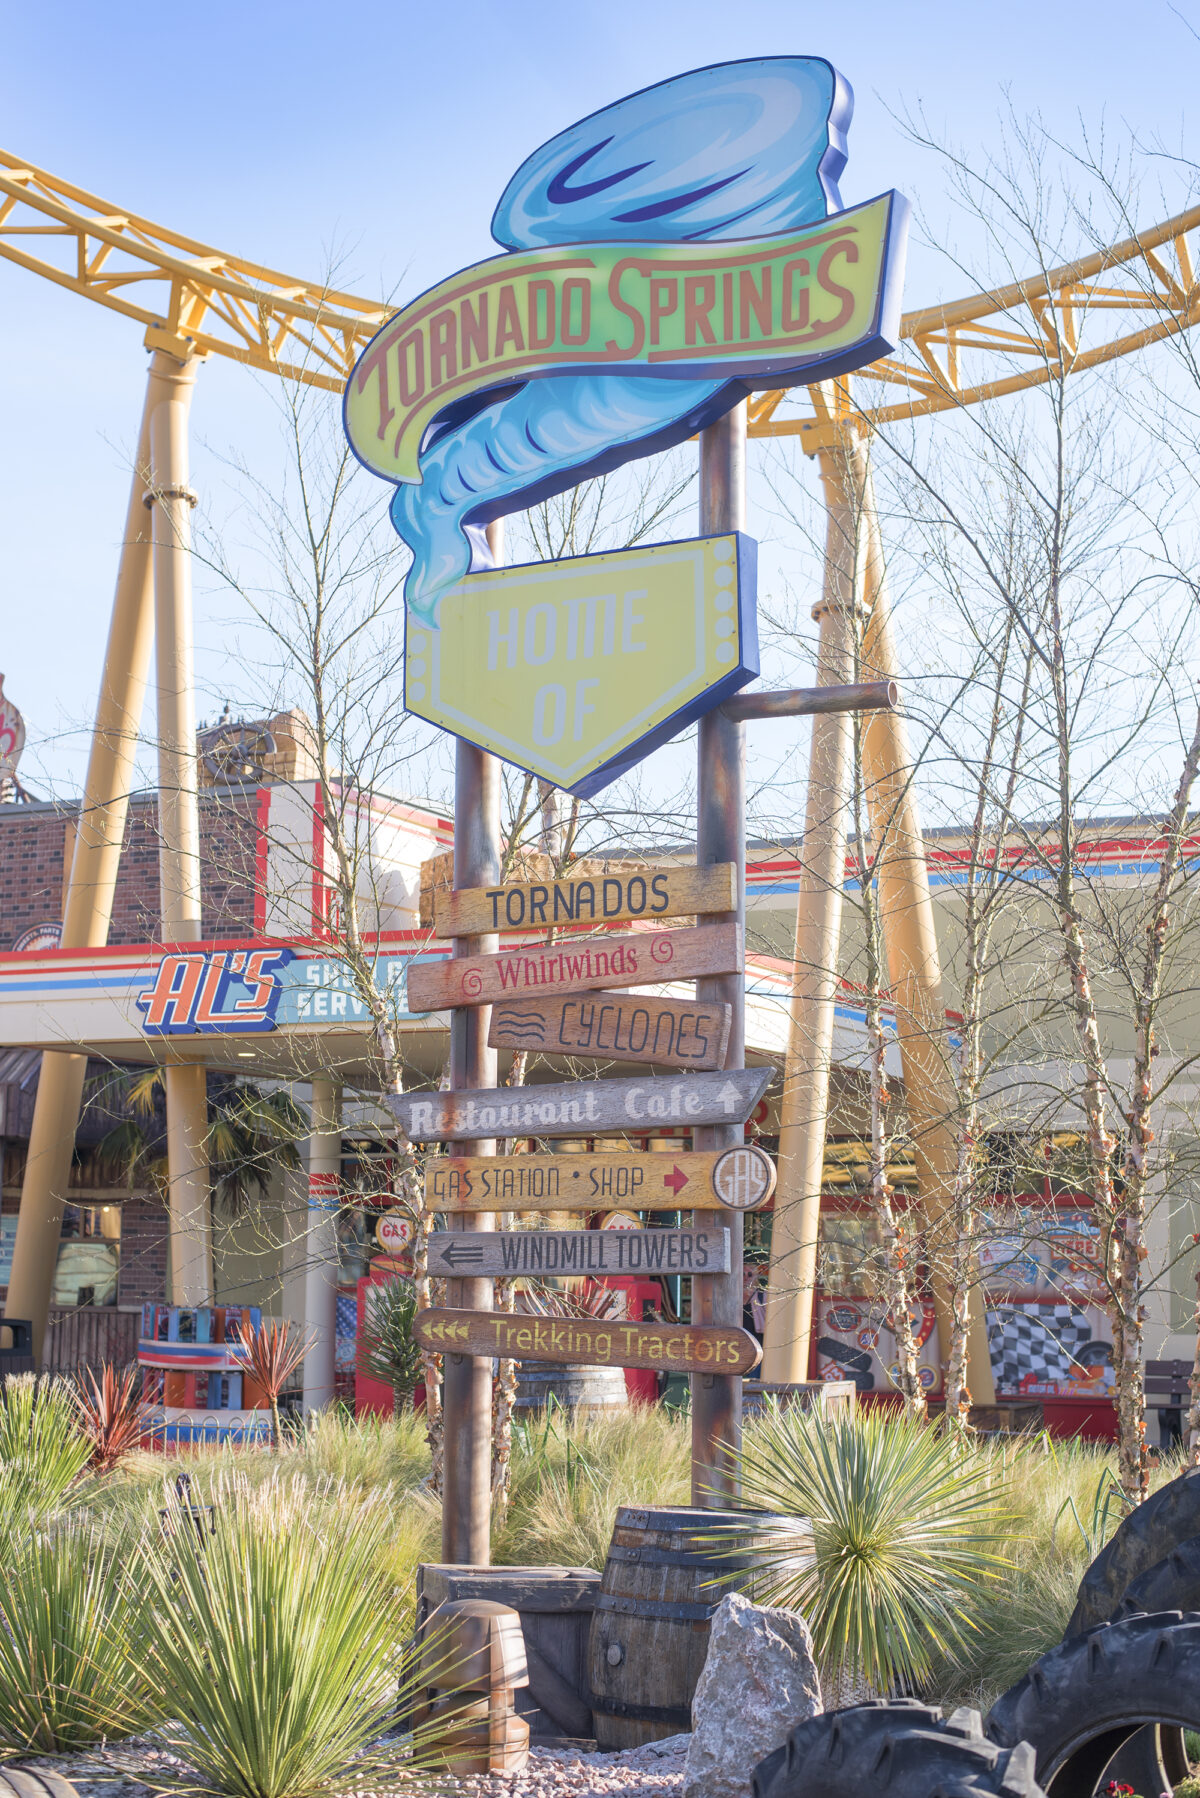 Image shows the main signpost in Paultons Park Tornado Springs area of the theme park in Hampshire, england.